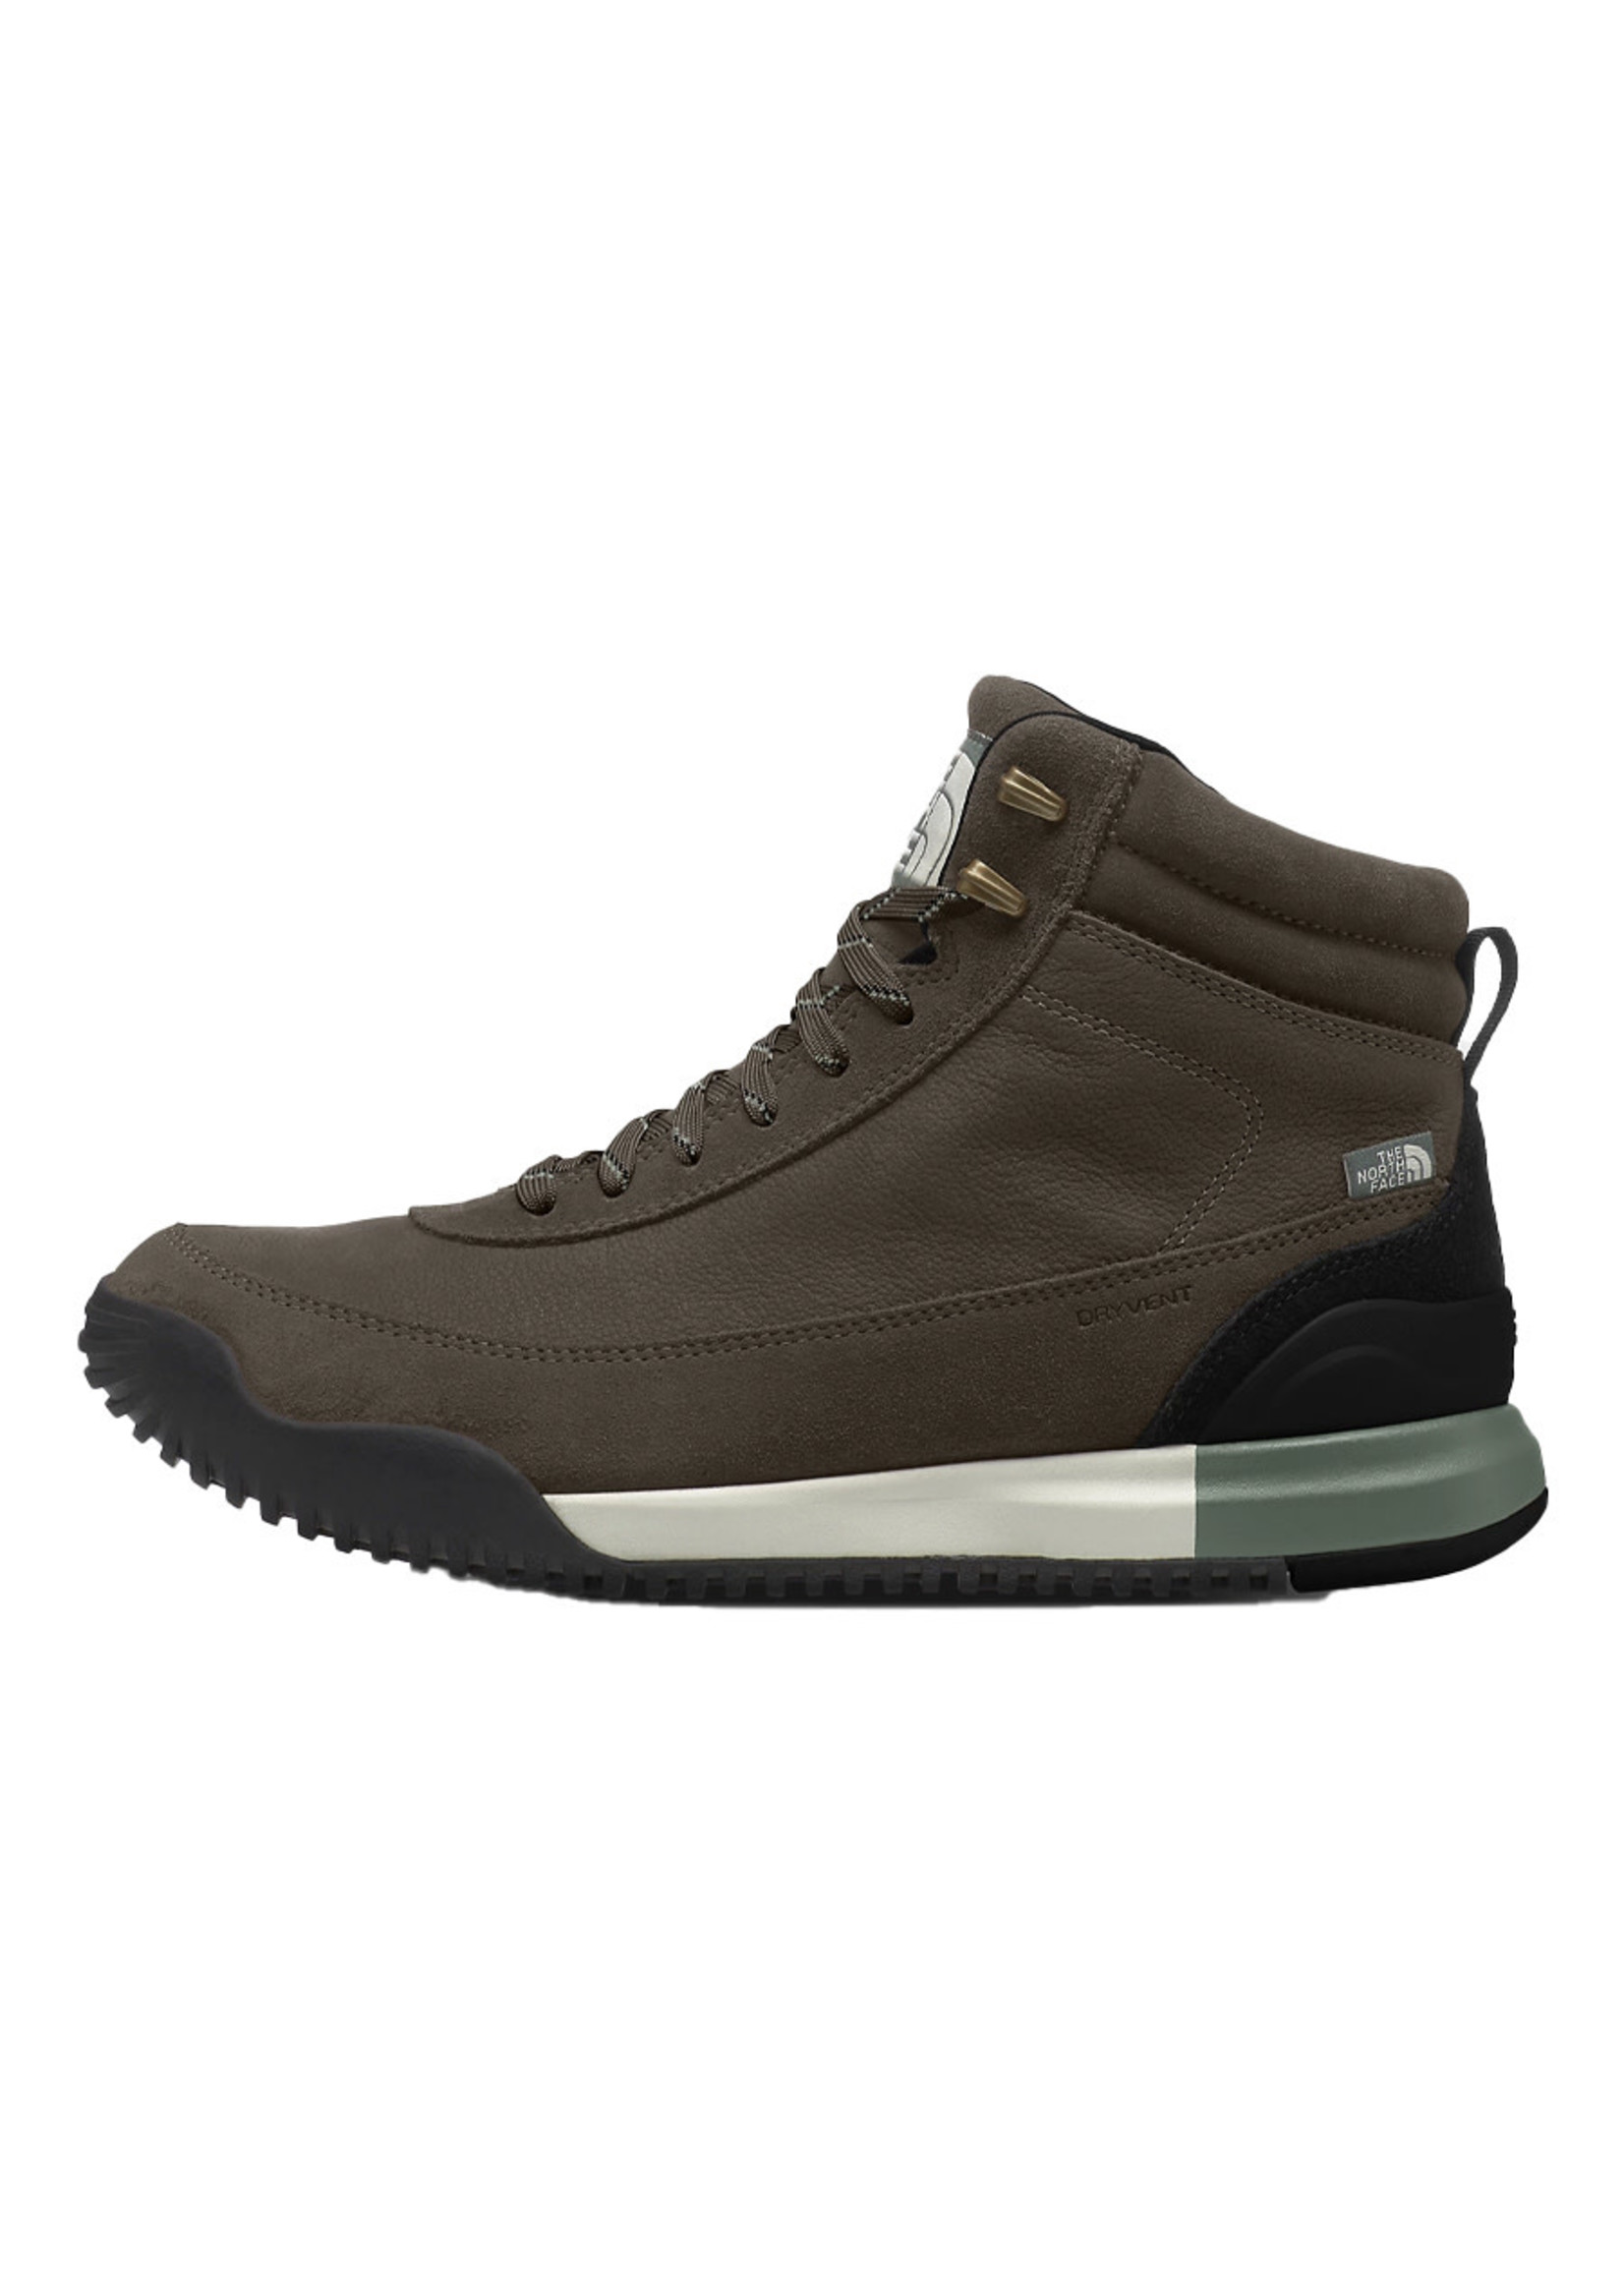 THE NORTH FACE Bottes en cuir BACK-TO-BERKELEY III (Homme)